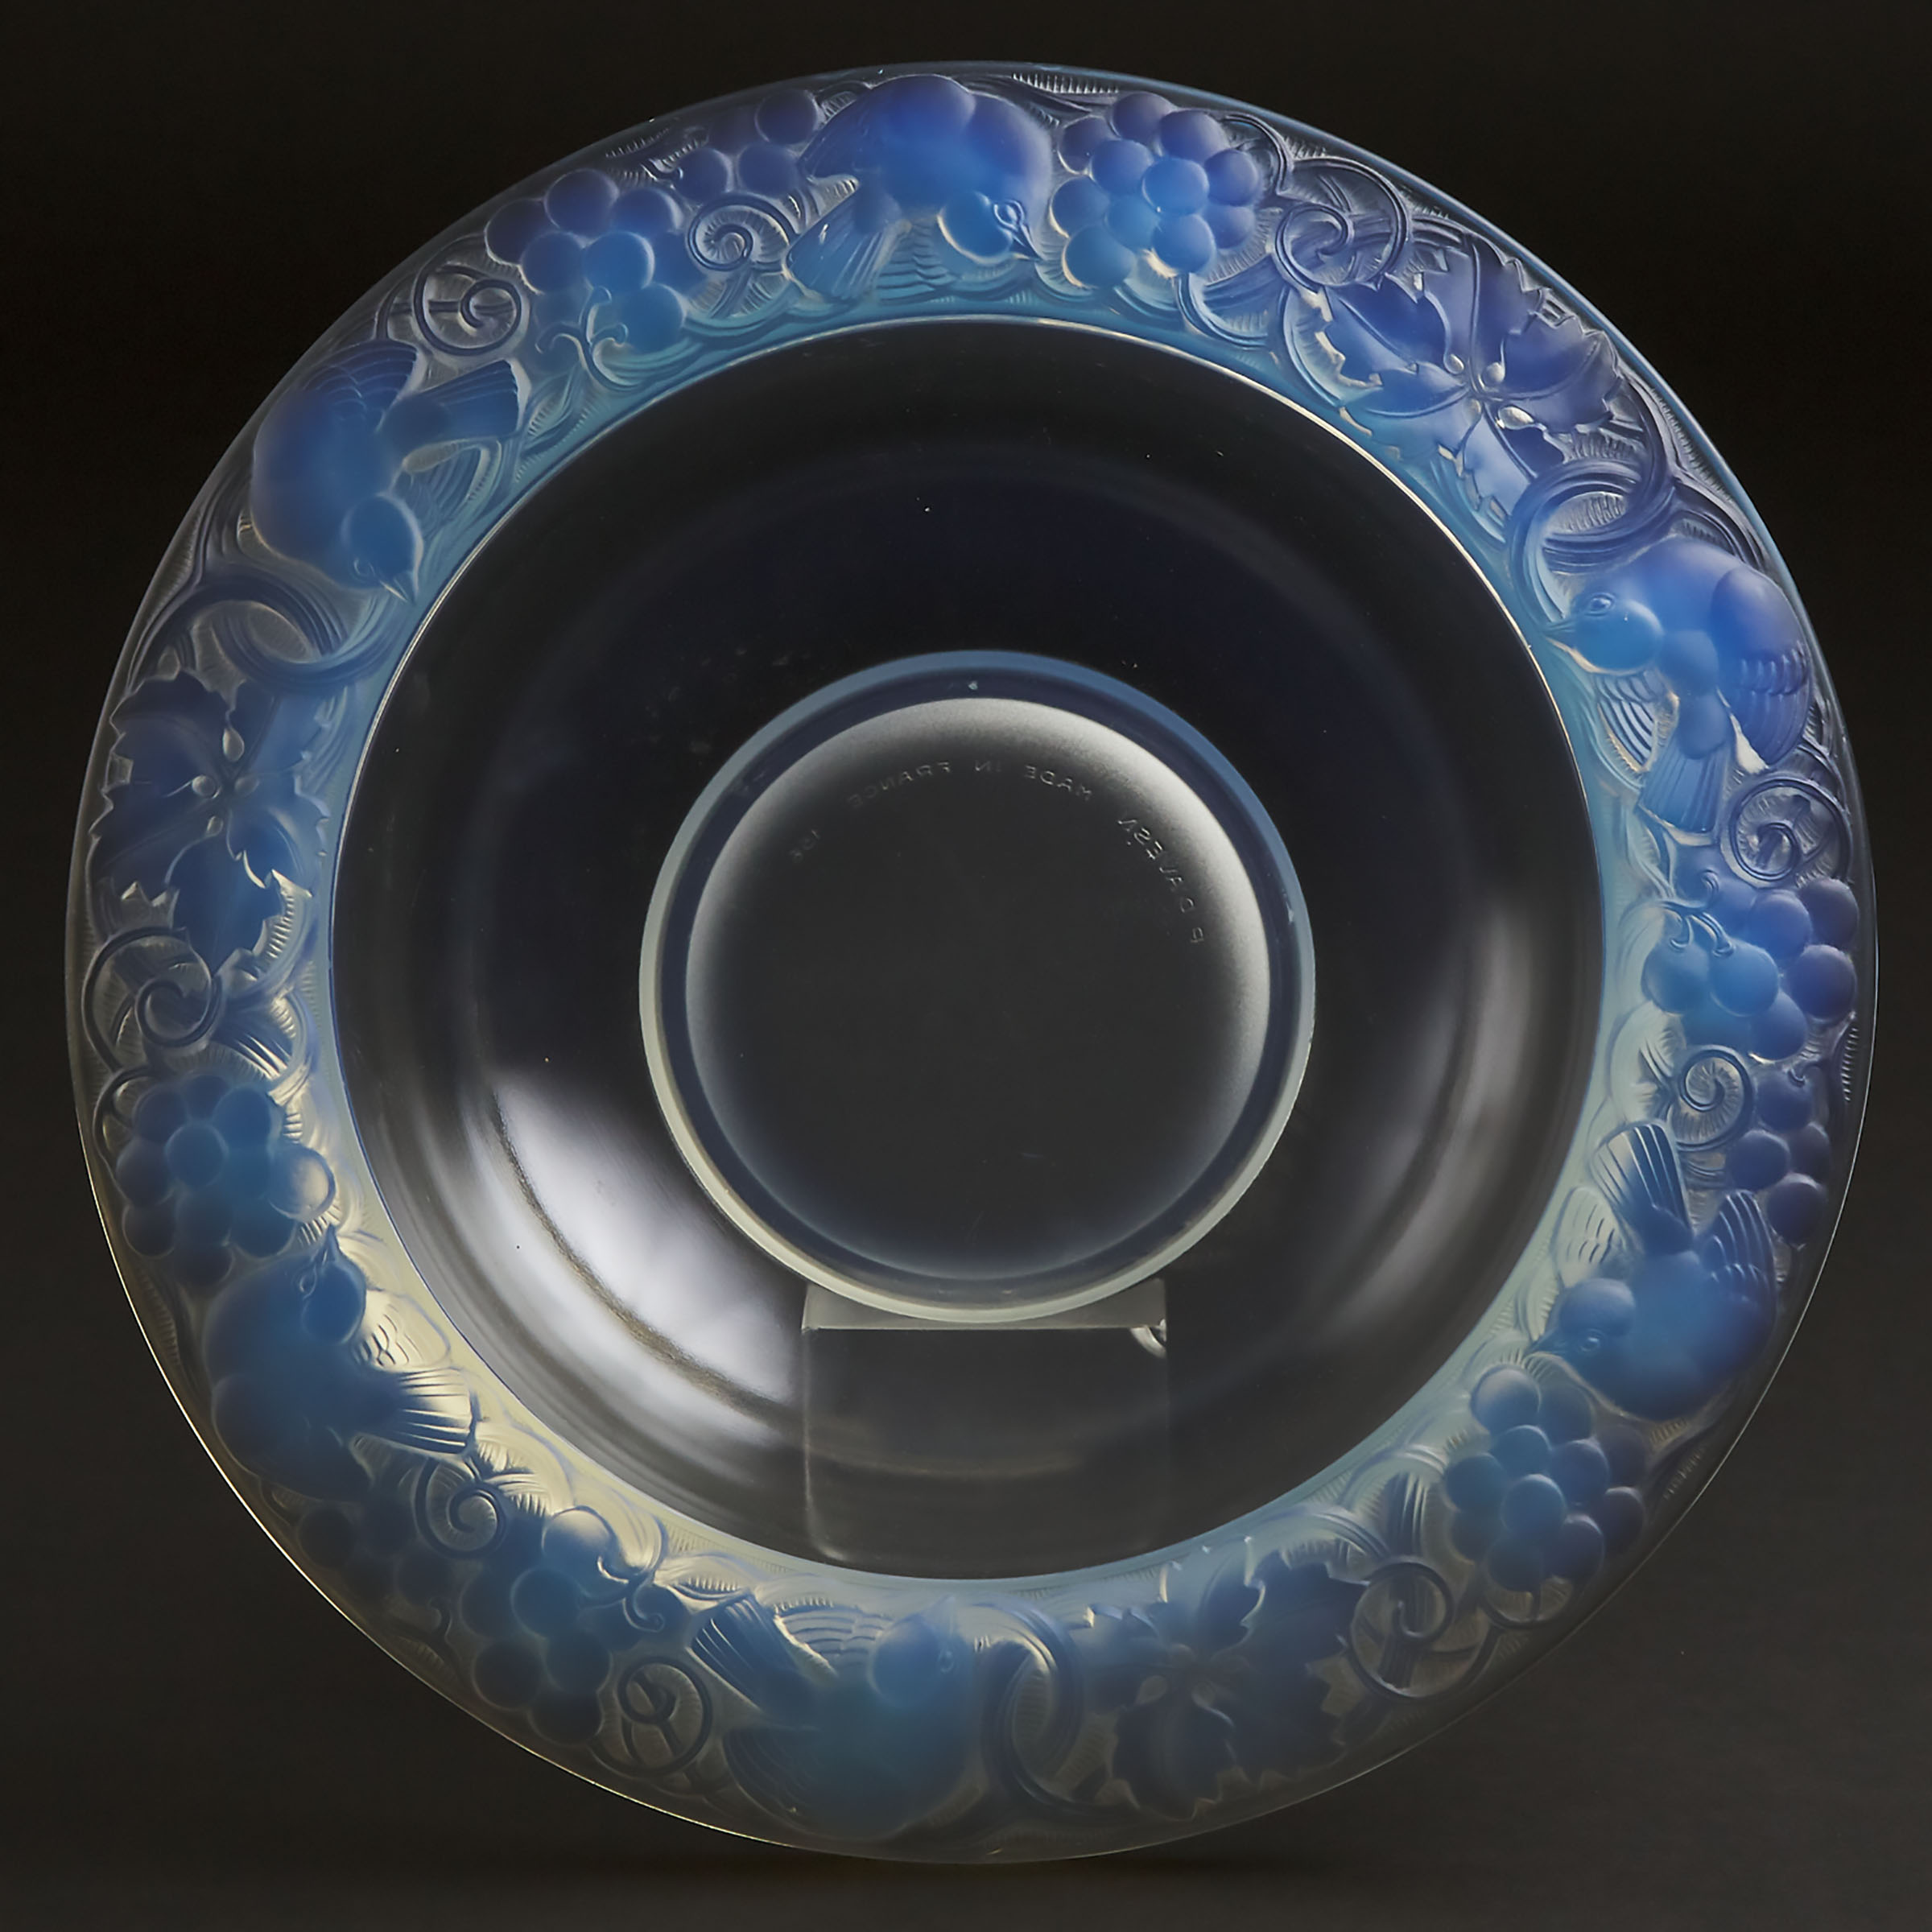 Pierre D'Avsen Moulded and Partly Frosted Glass Bowl, c.1930